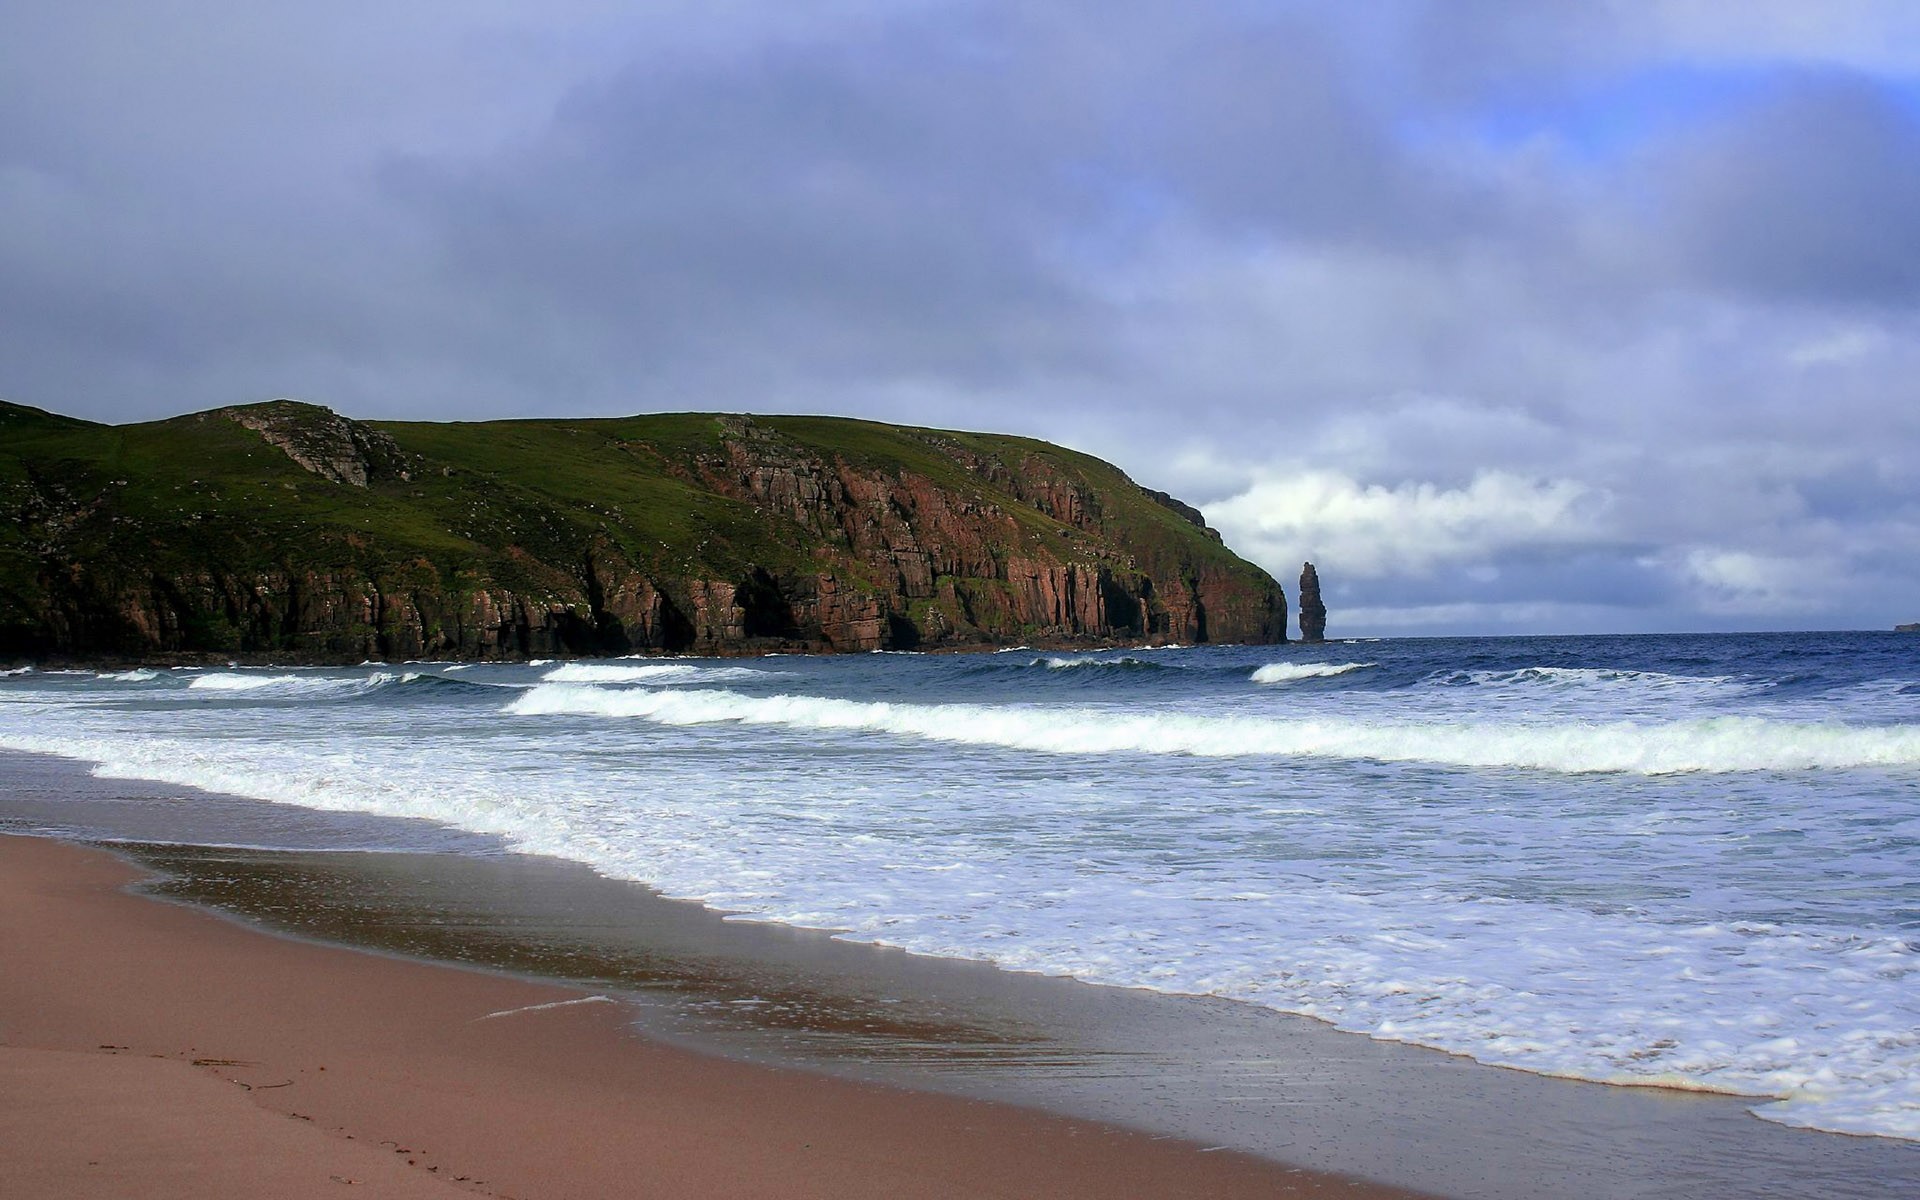 Coastal landscape with sandy beach, cliff, and tide along the shoreline.